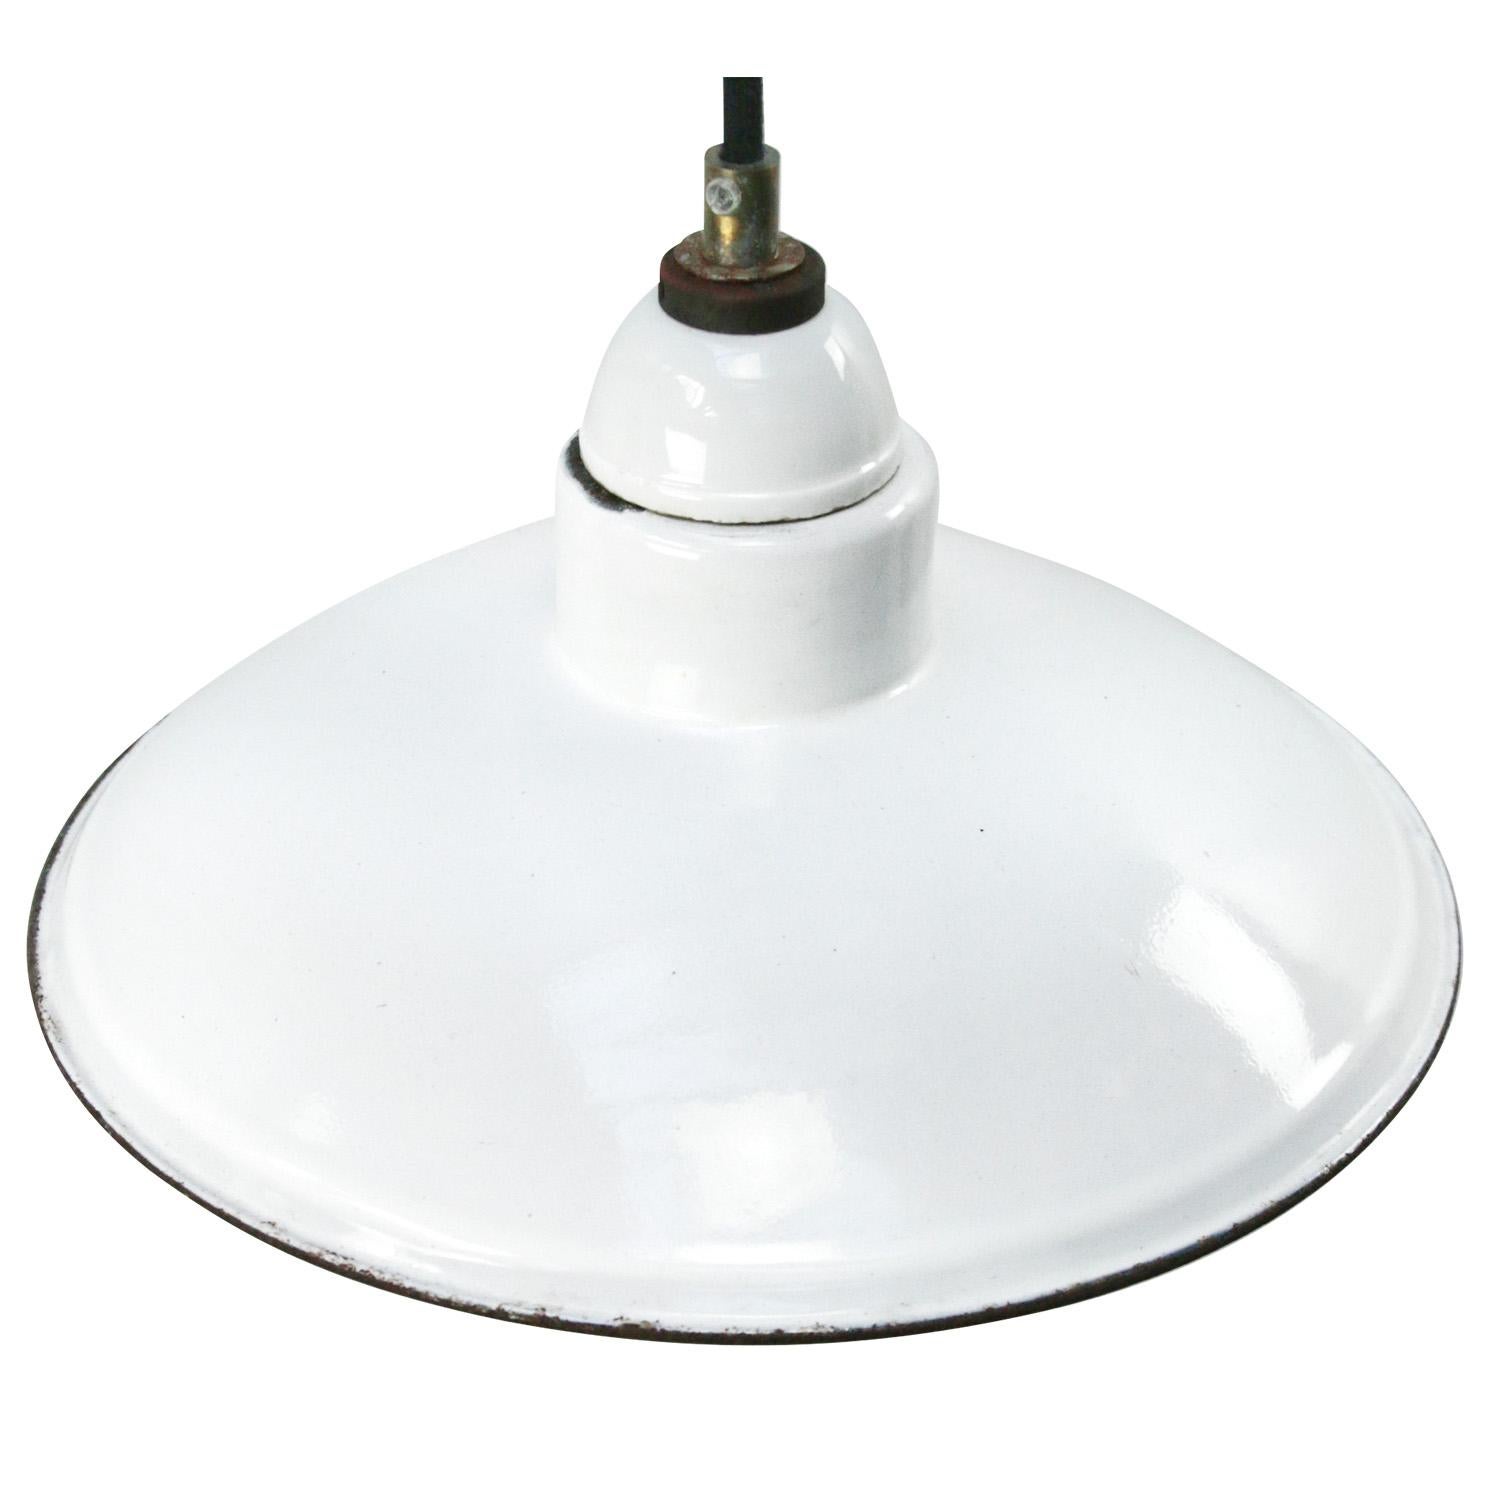 Porcelain Industrial hanging lamp.
White porcelain top with white enamel shade
Brass top
2 conductors, no ground.

Weight: 0.60 kg / 1.3 lb

Priced per individual item. All lamps have been made suitable by international standards for